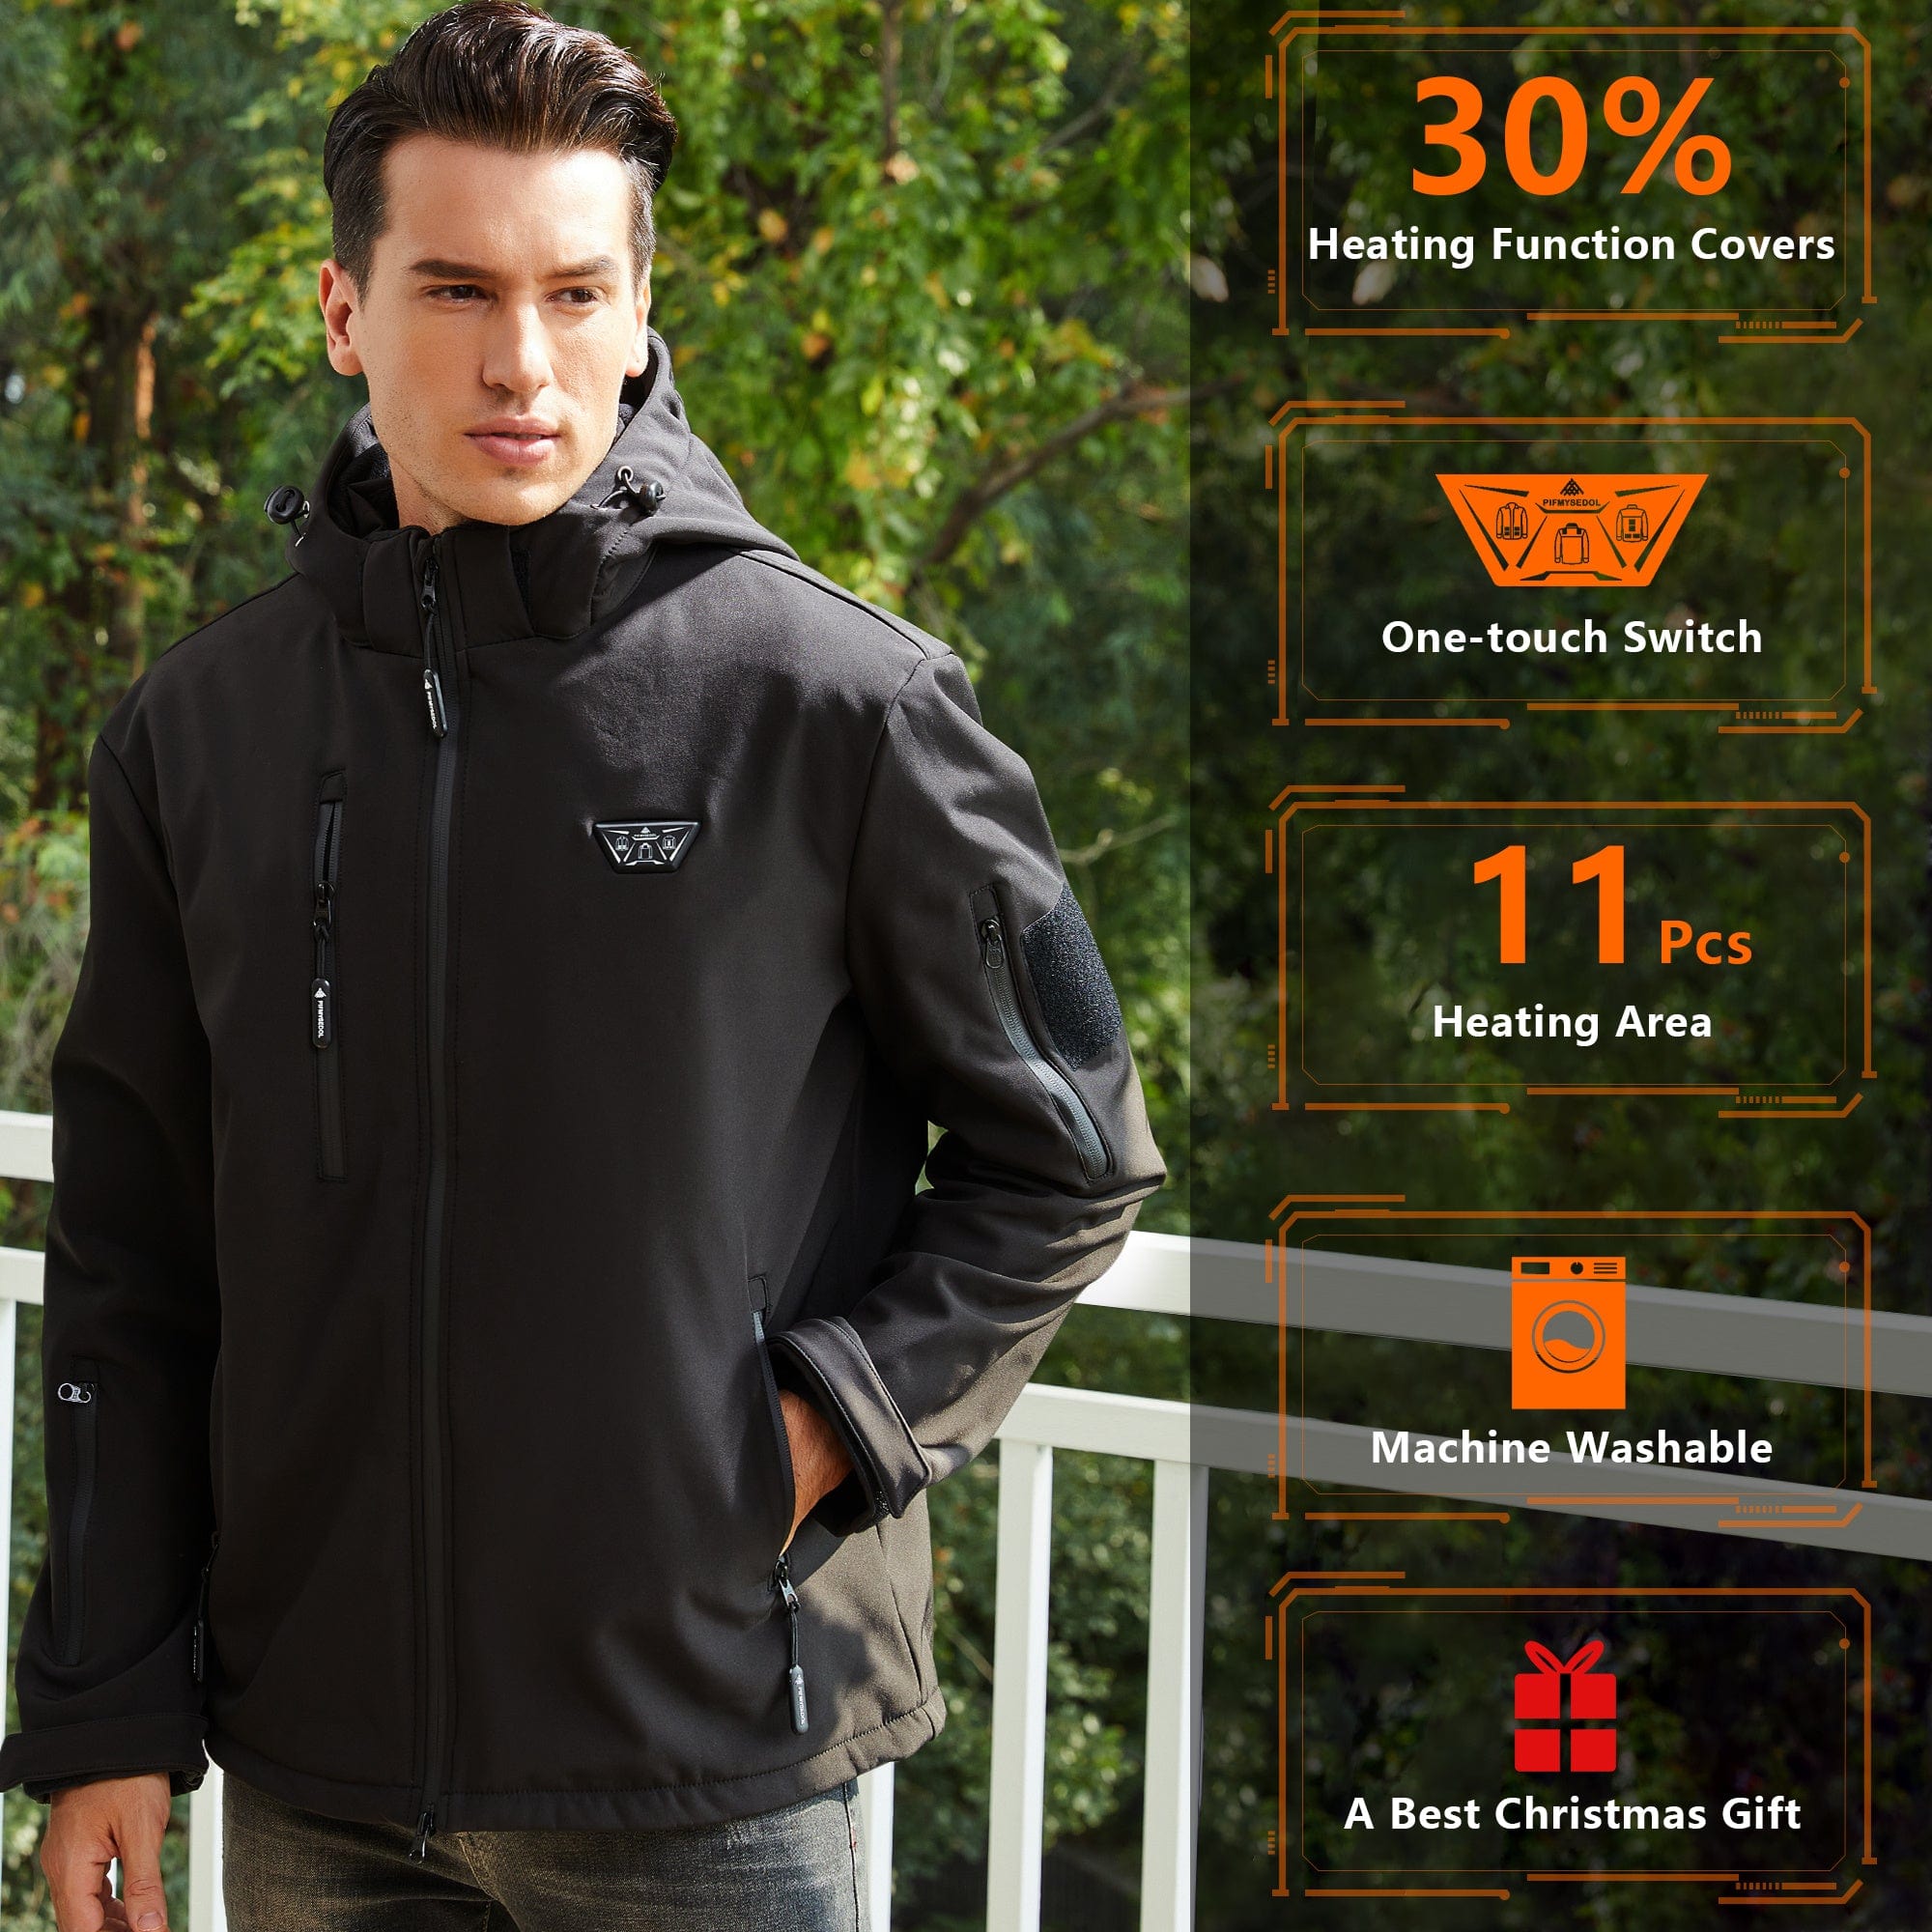 Men's Heated Jacket For Outdoor Sports, Skiing, Hiking - Machine Washable Jacket In Black